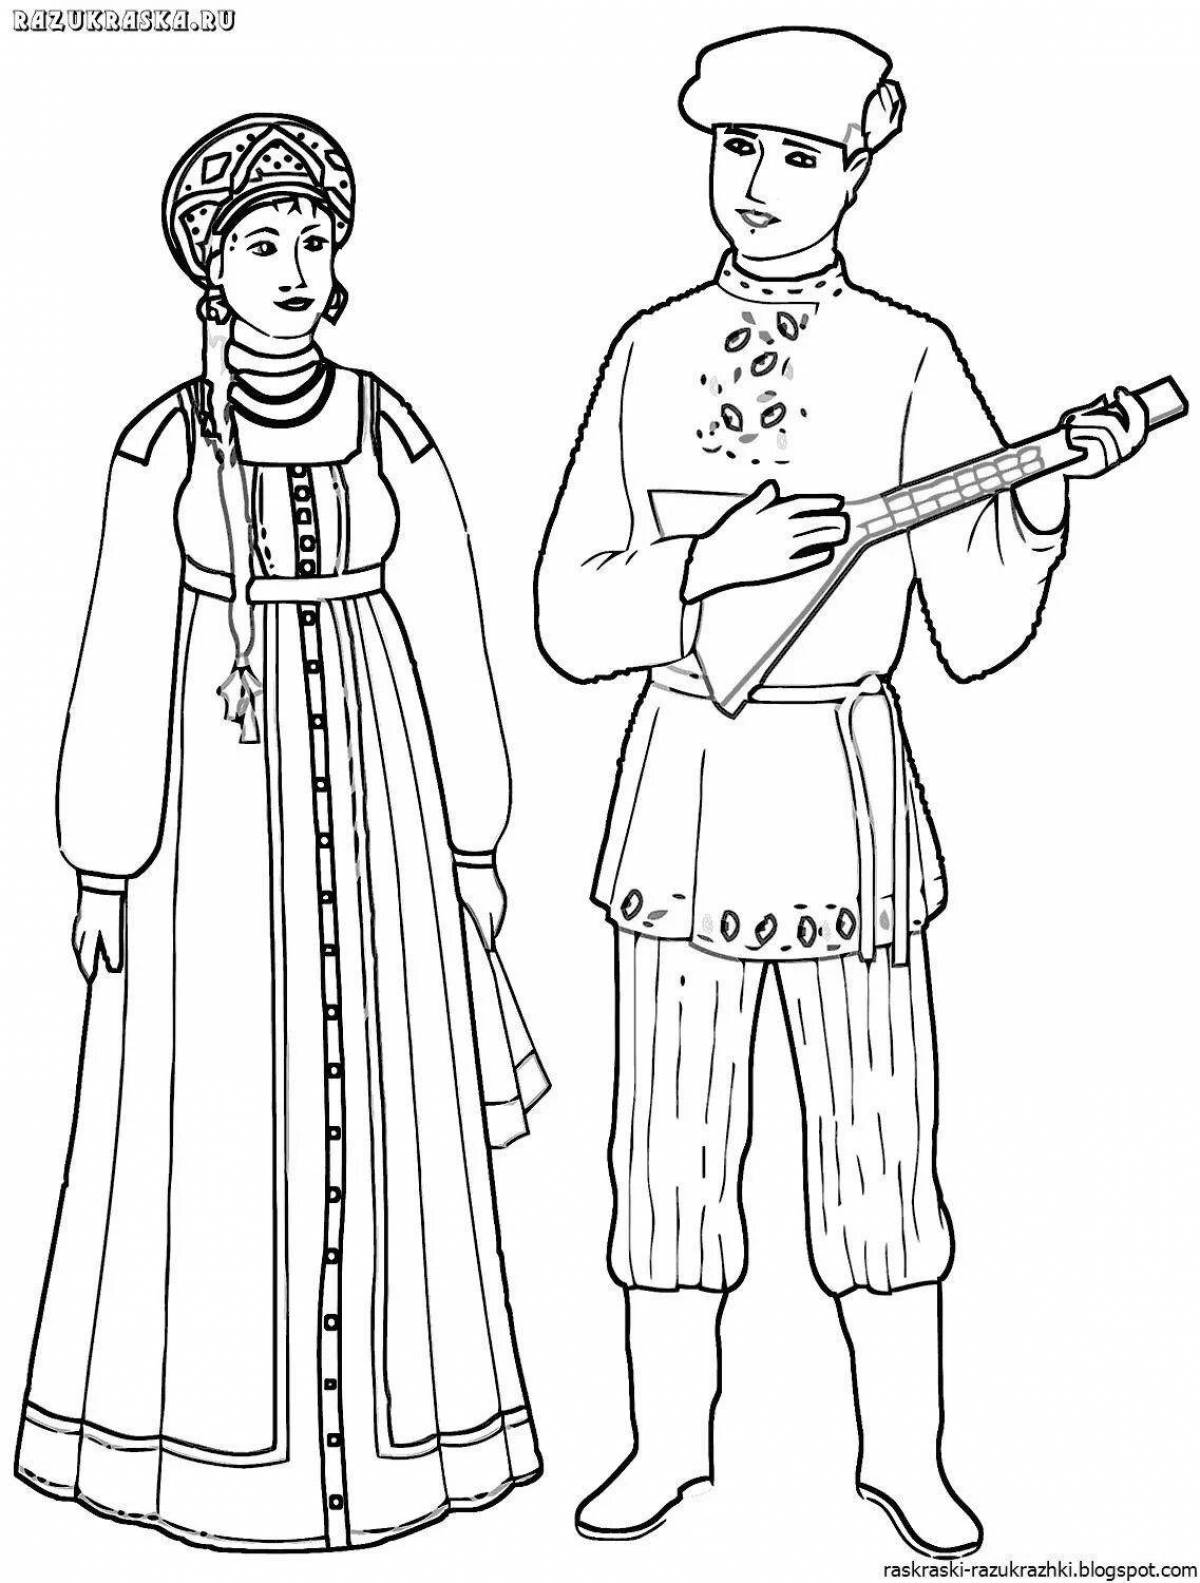 Delightful belarusian clothes coloring pages for kids